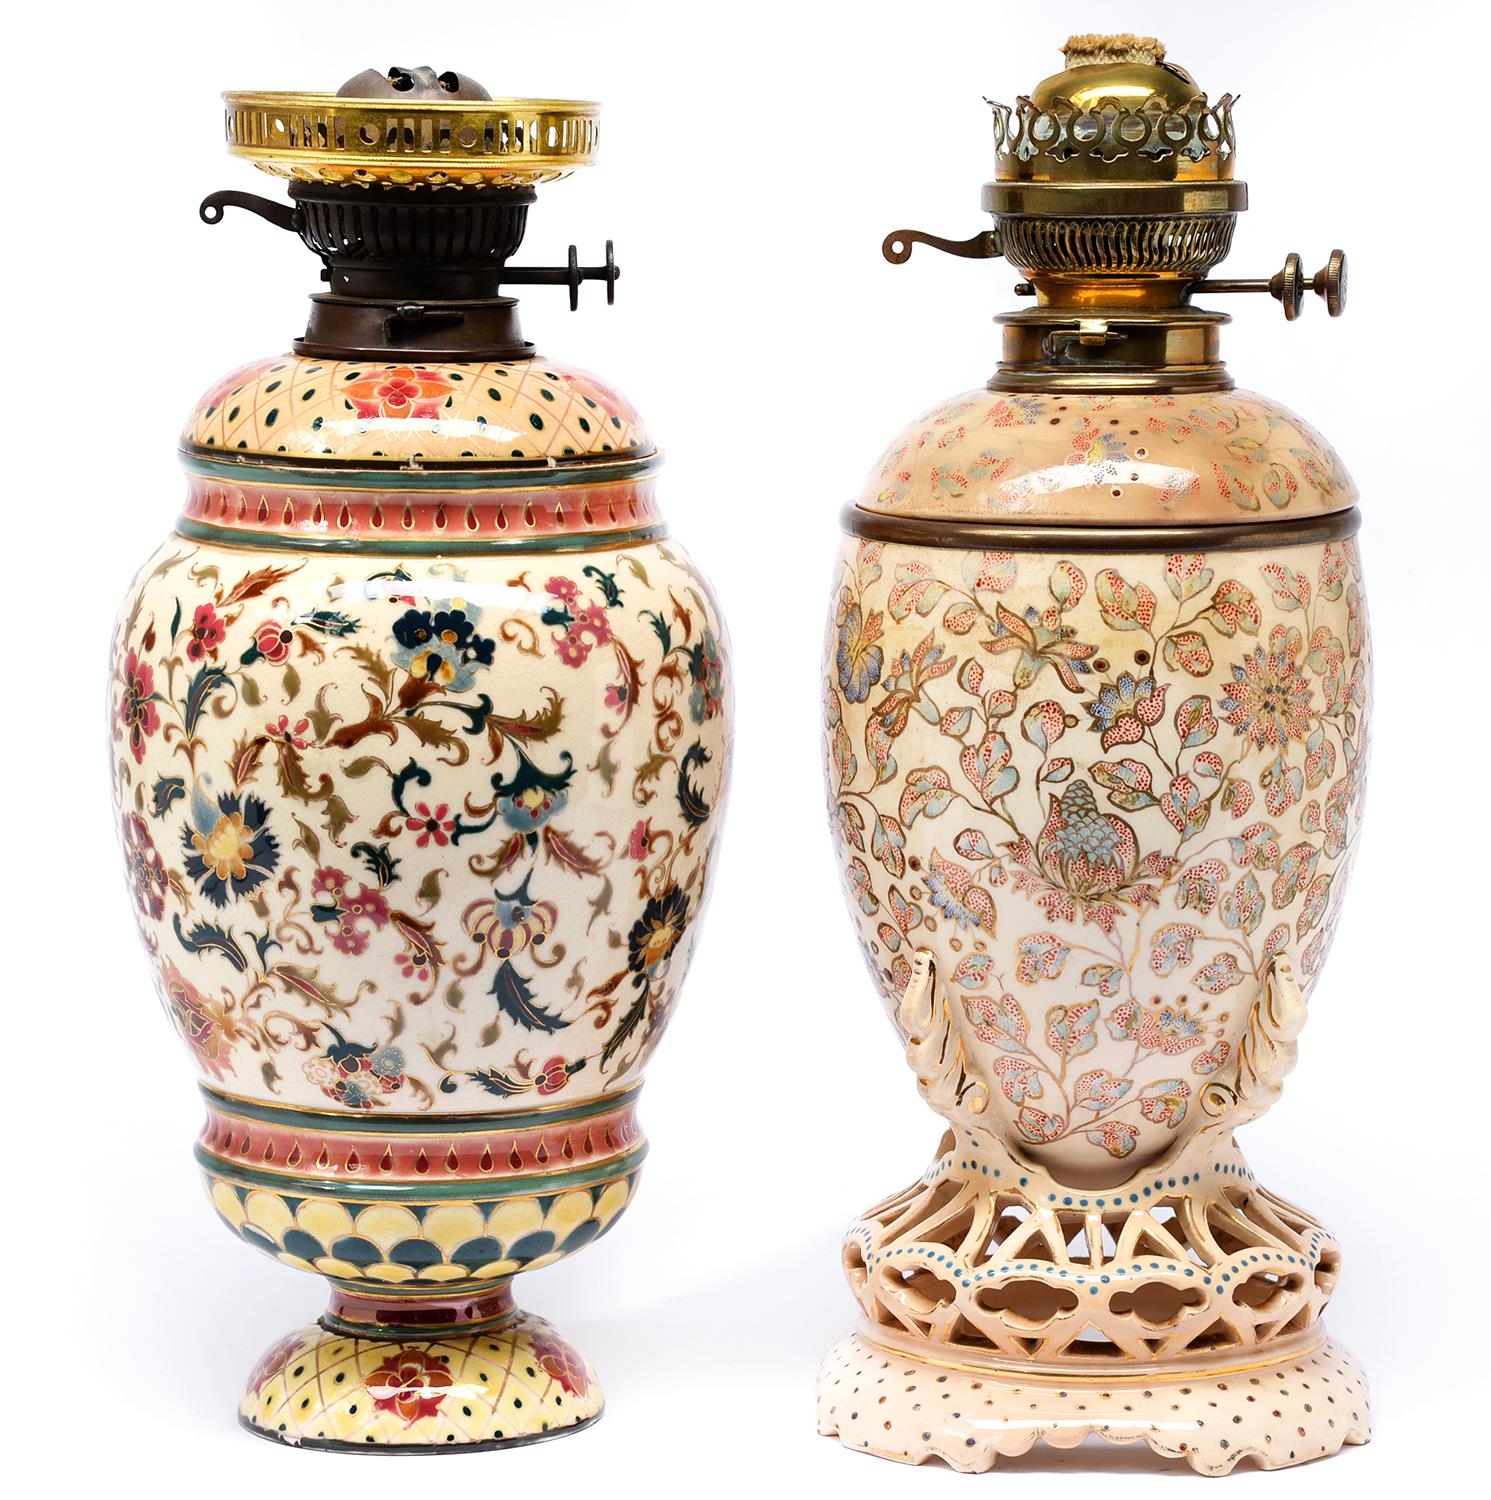 A Zsolnay oil lamp and base, late 19th c, decorated with stylised flowers, 38cm h, impressed and